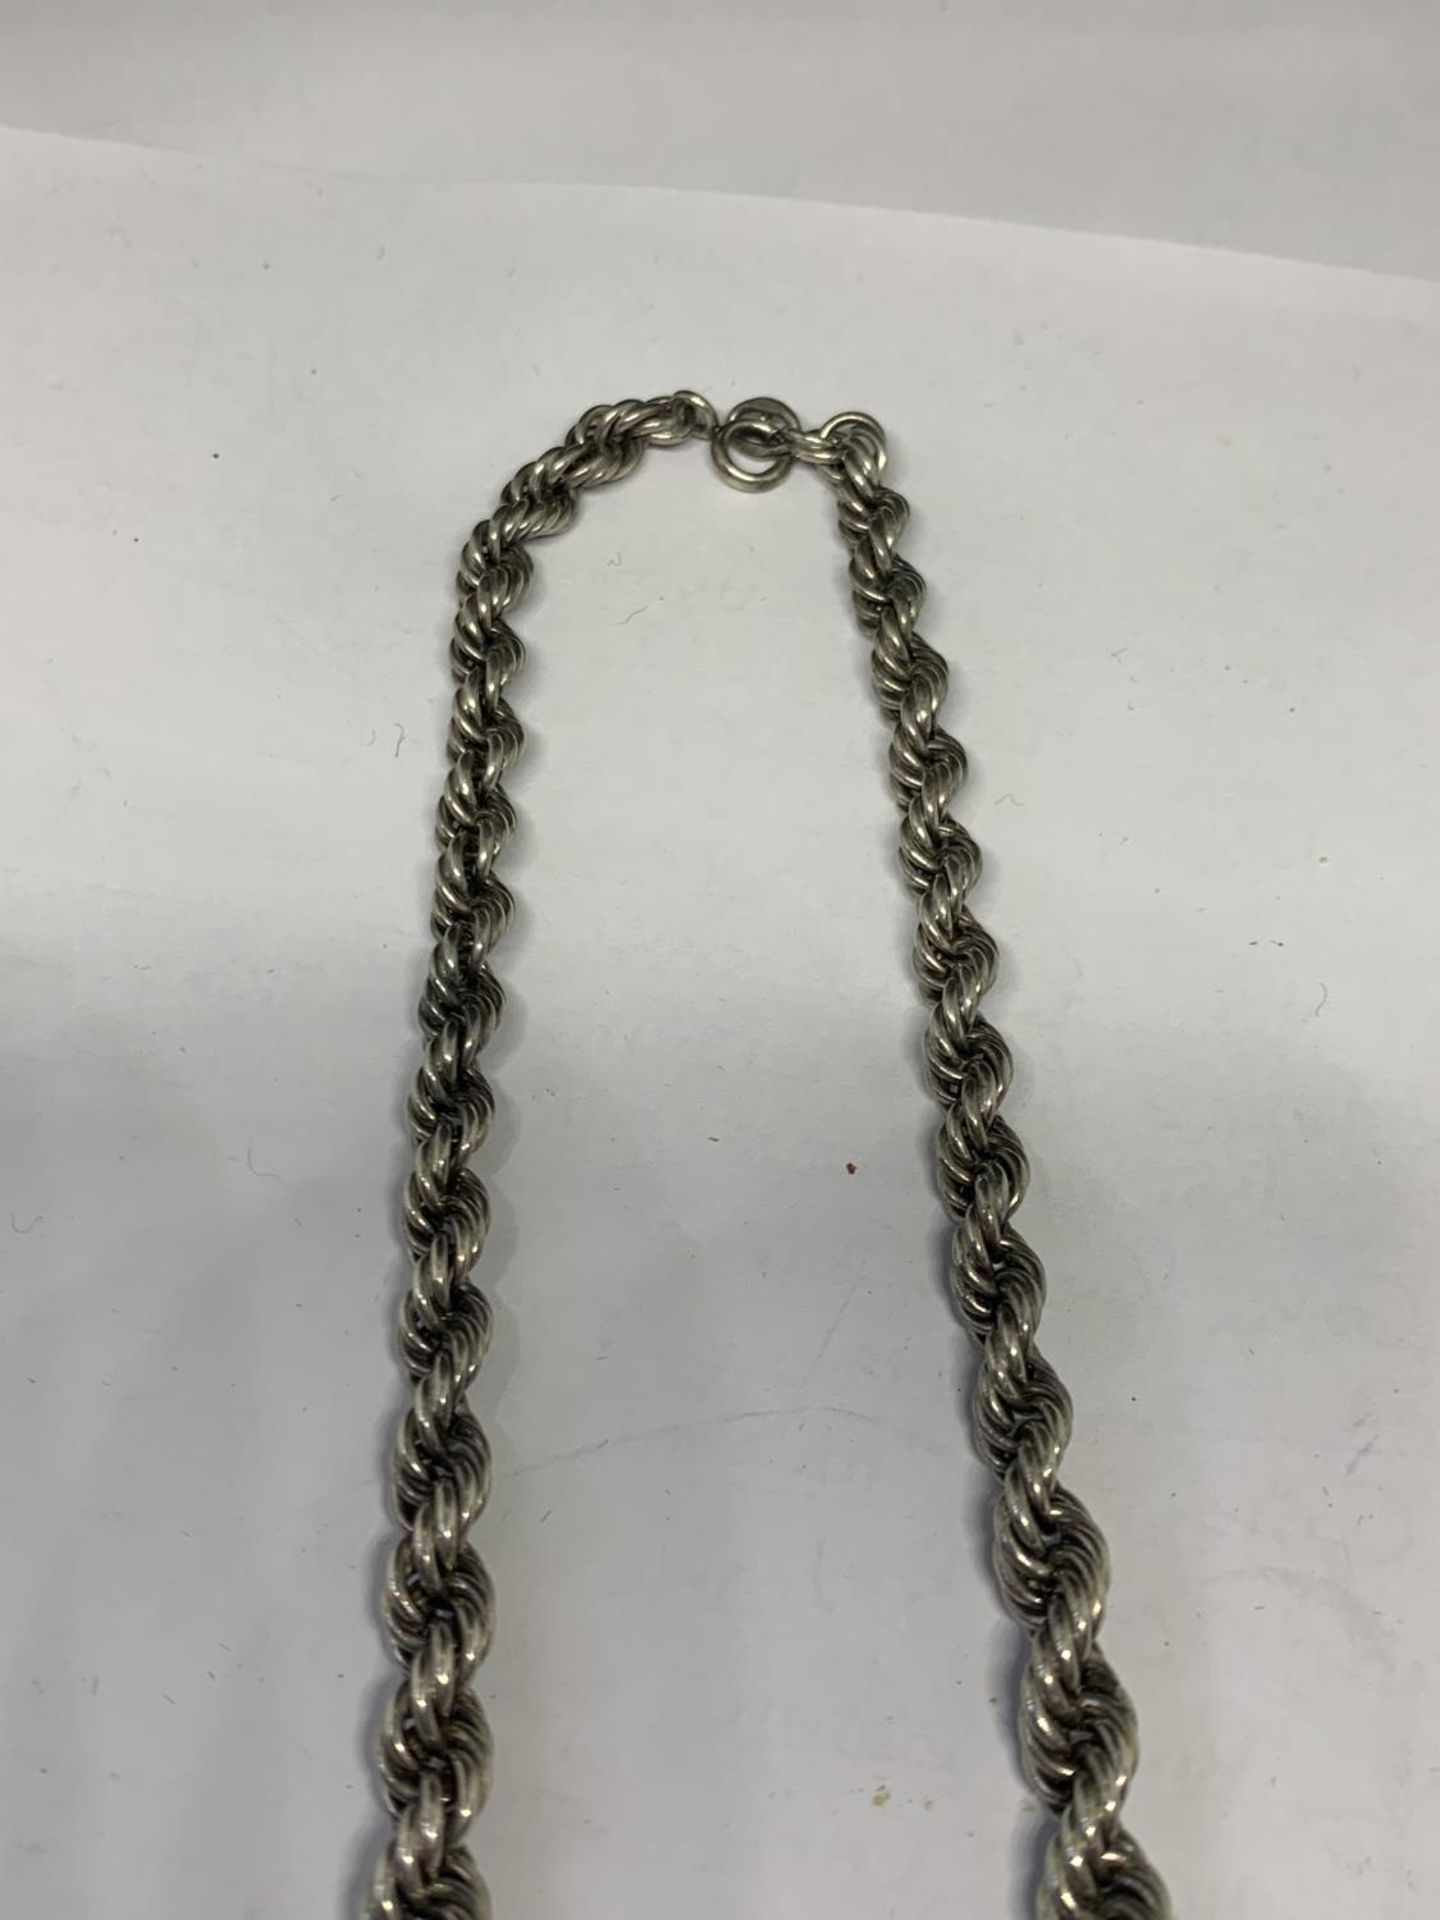 A SILVER ROPE CHAIN LENGTH 18" - Image 3 of 3